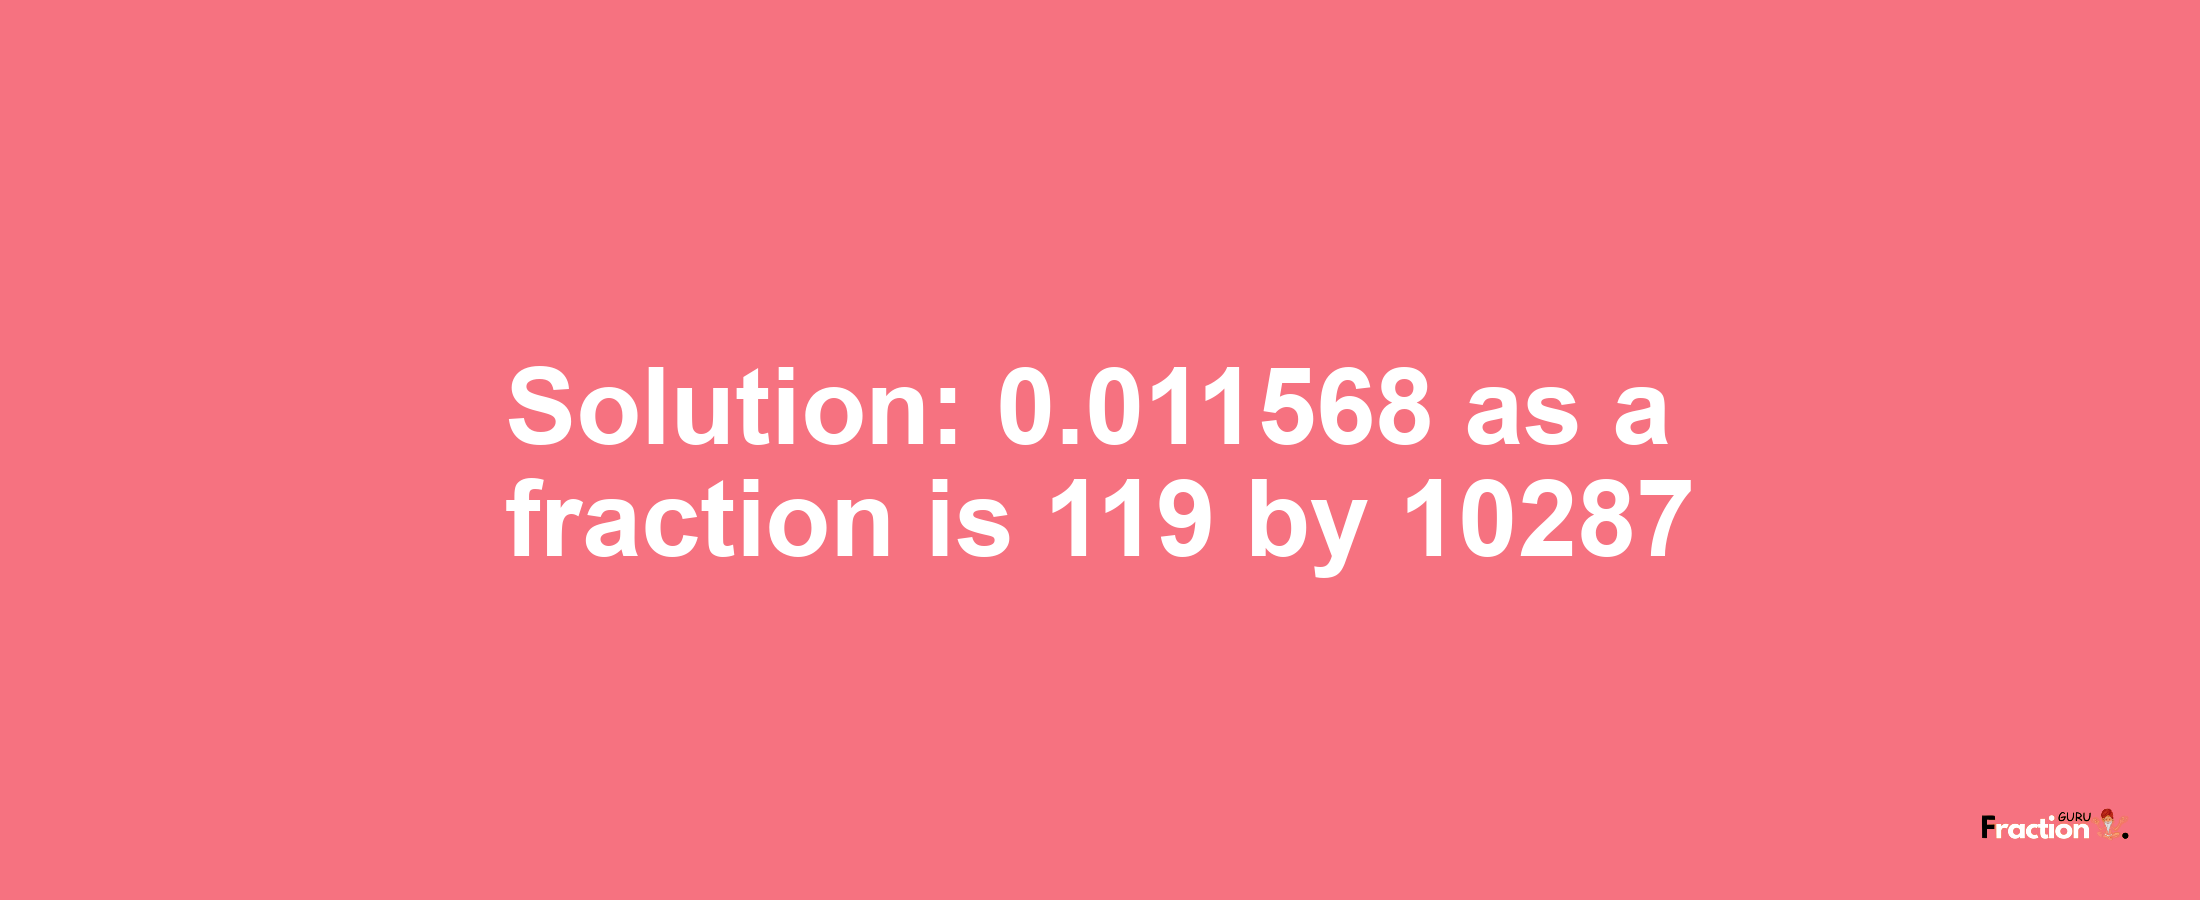 Solution:0.011568 as a fraction is 119/10287